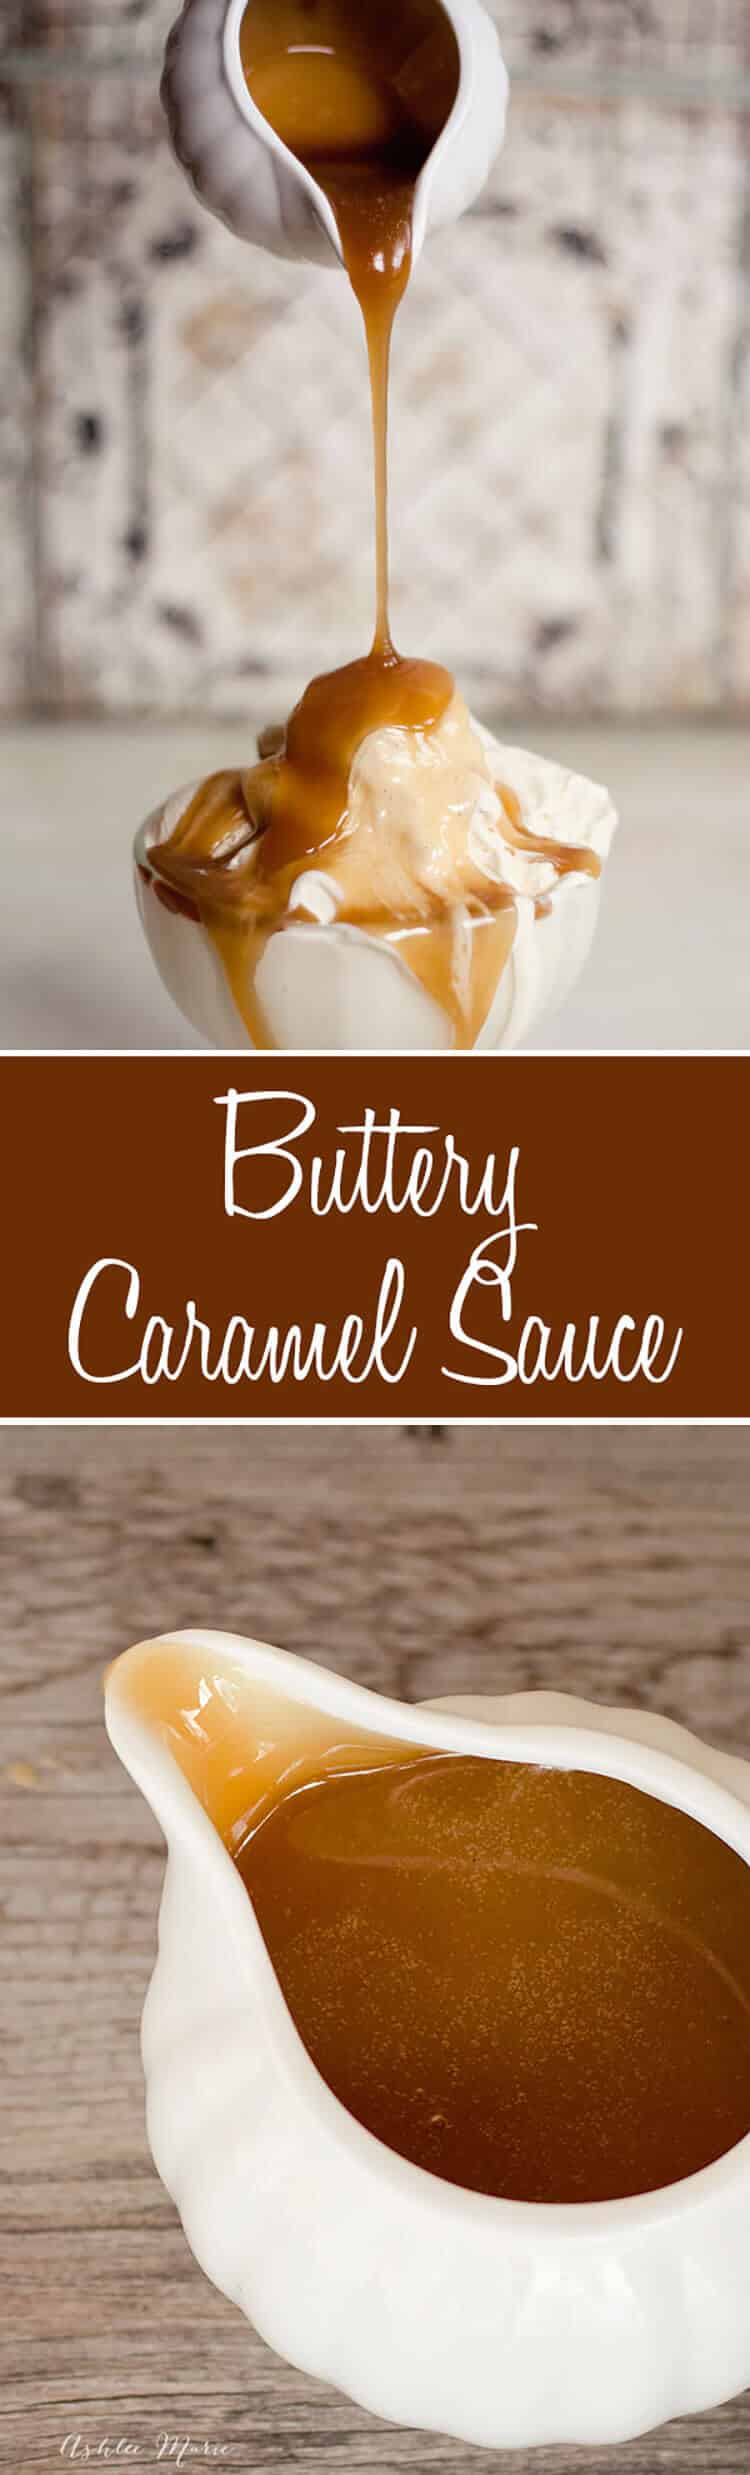 this homemade caramel sauce is buttery perfection, I eat it straight from the container, on ice cream cheesecake and more